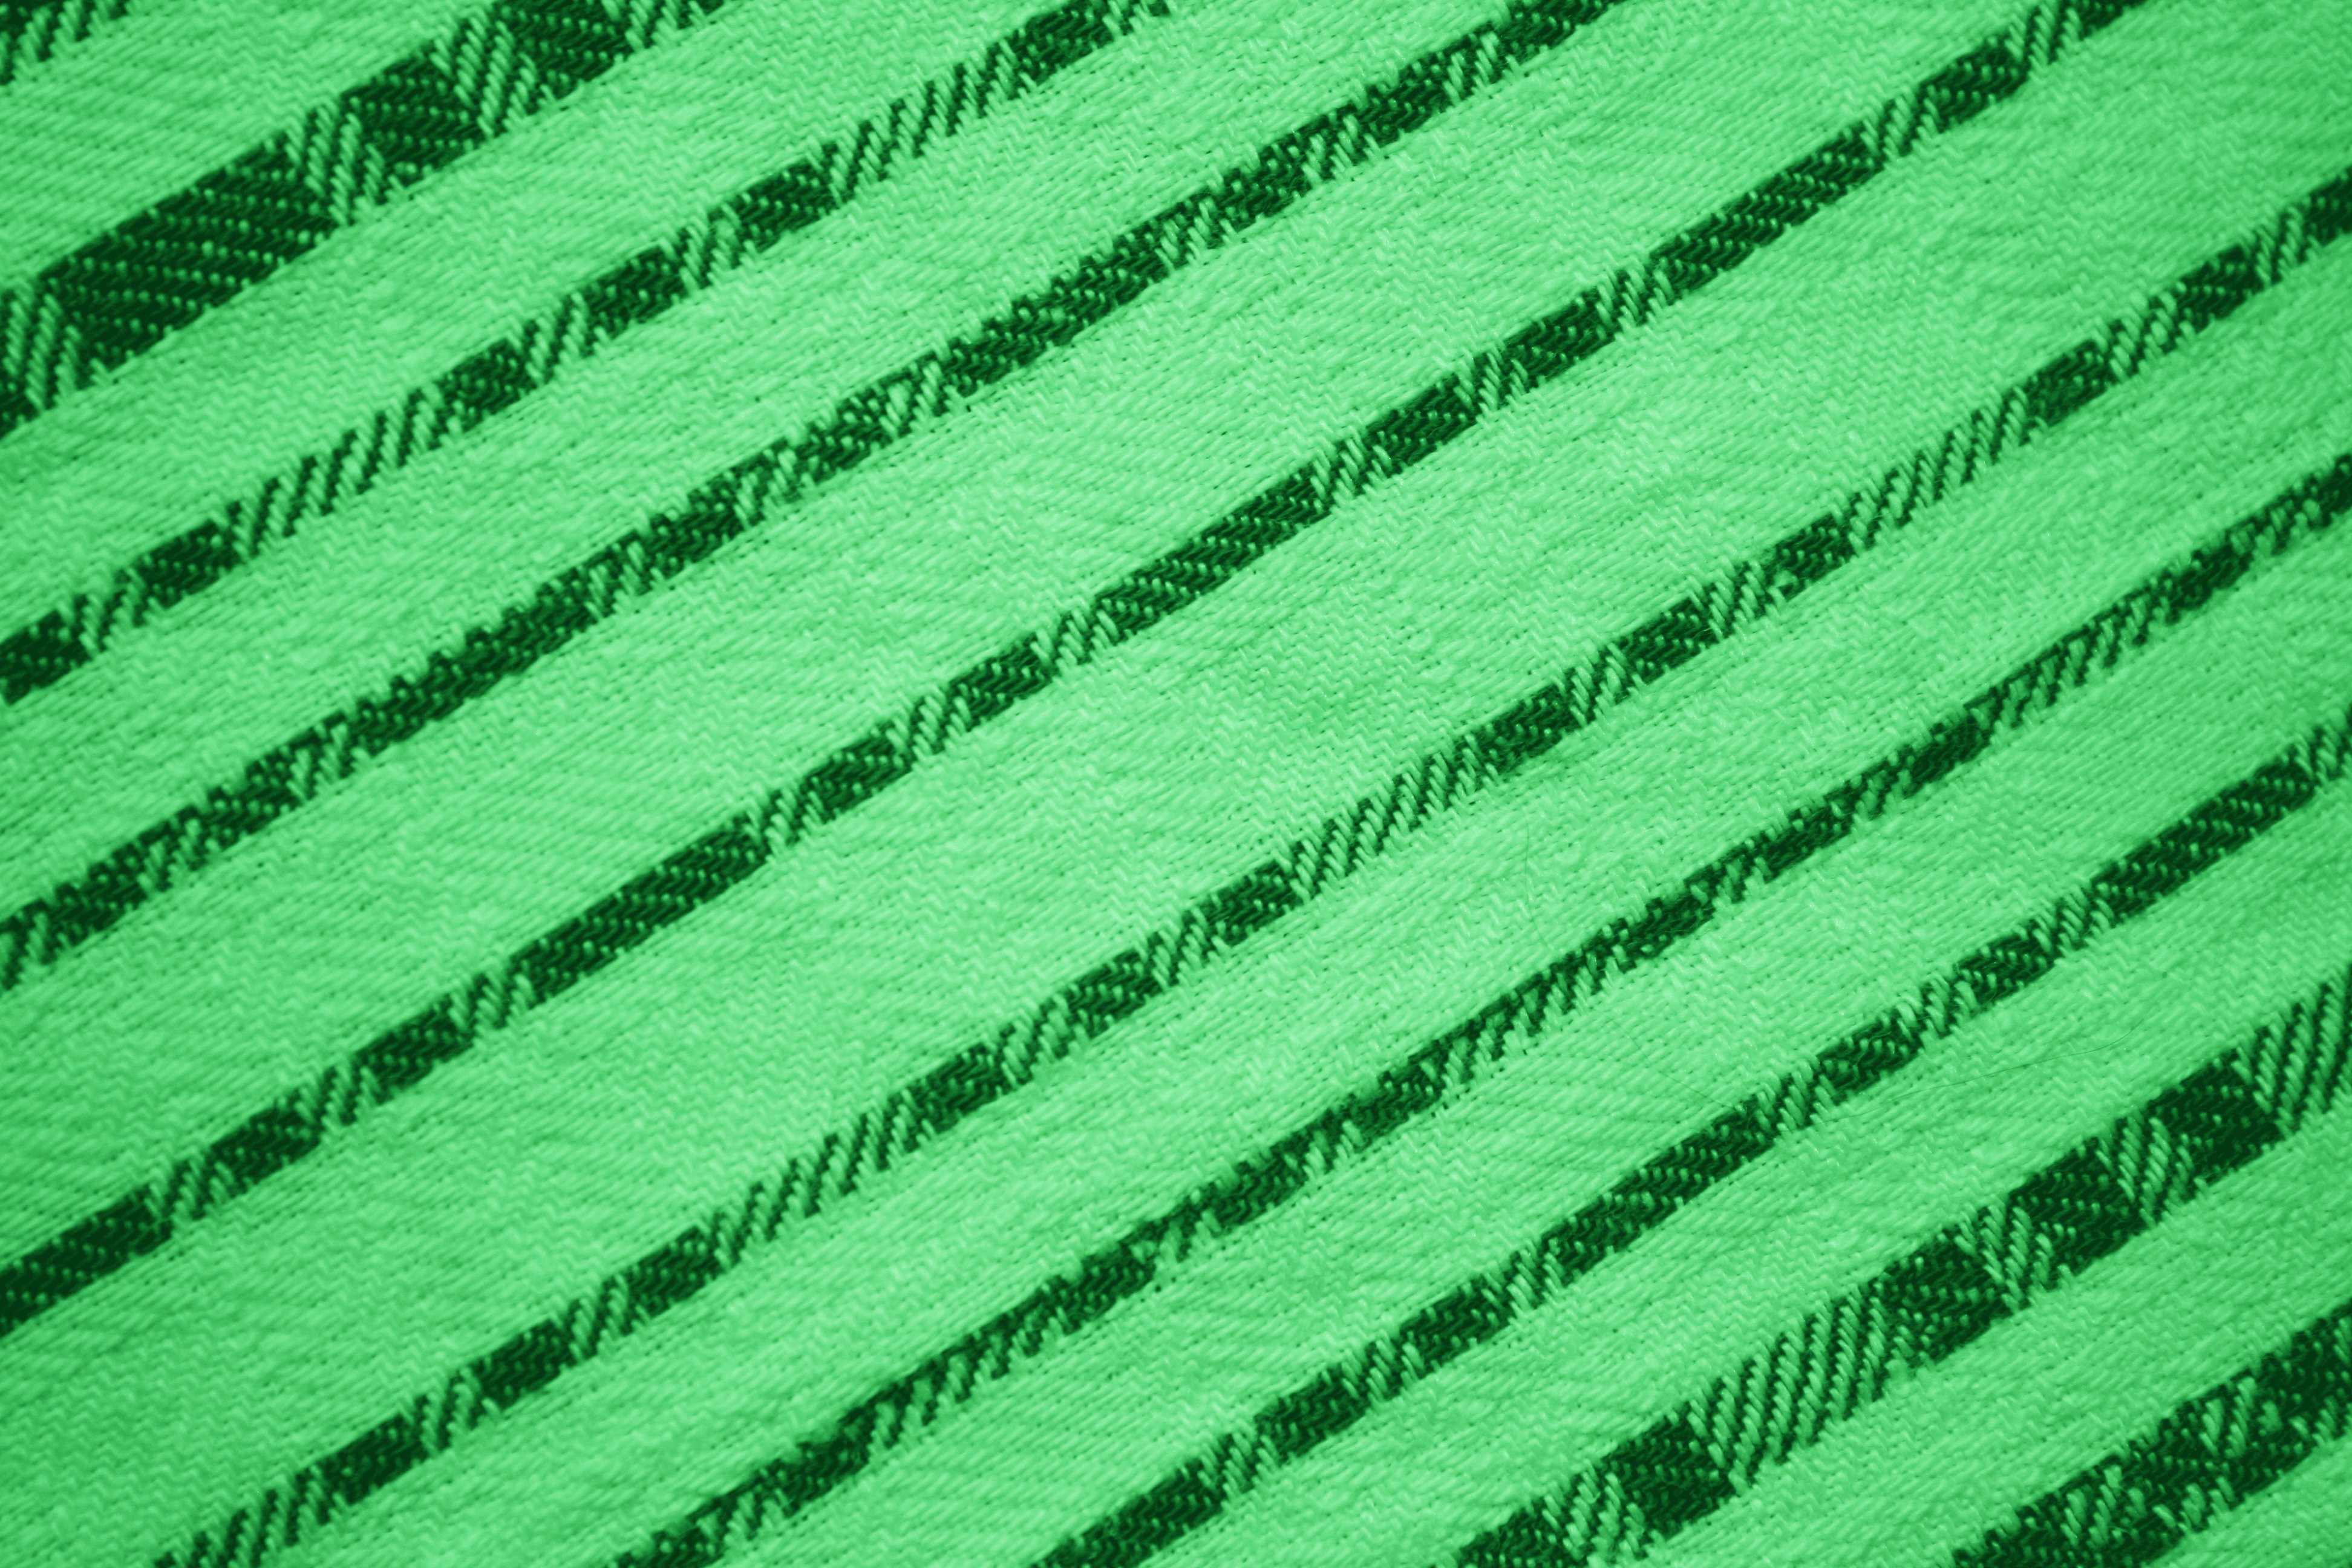 Green Diagonal Stripes Fabric Texture Picture